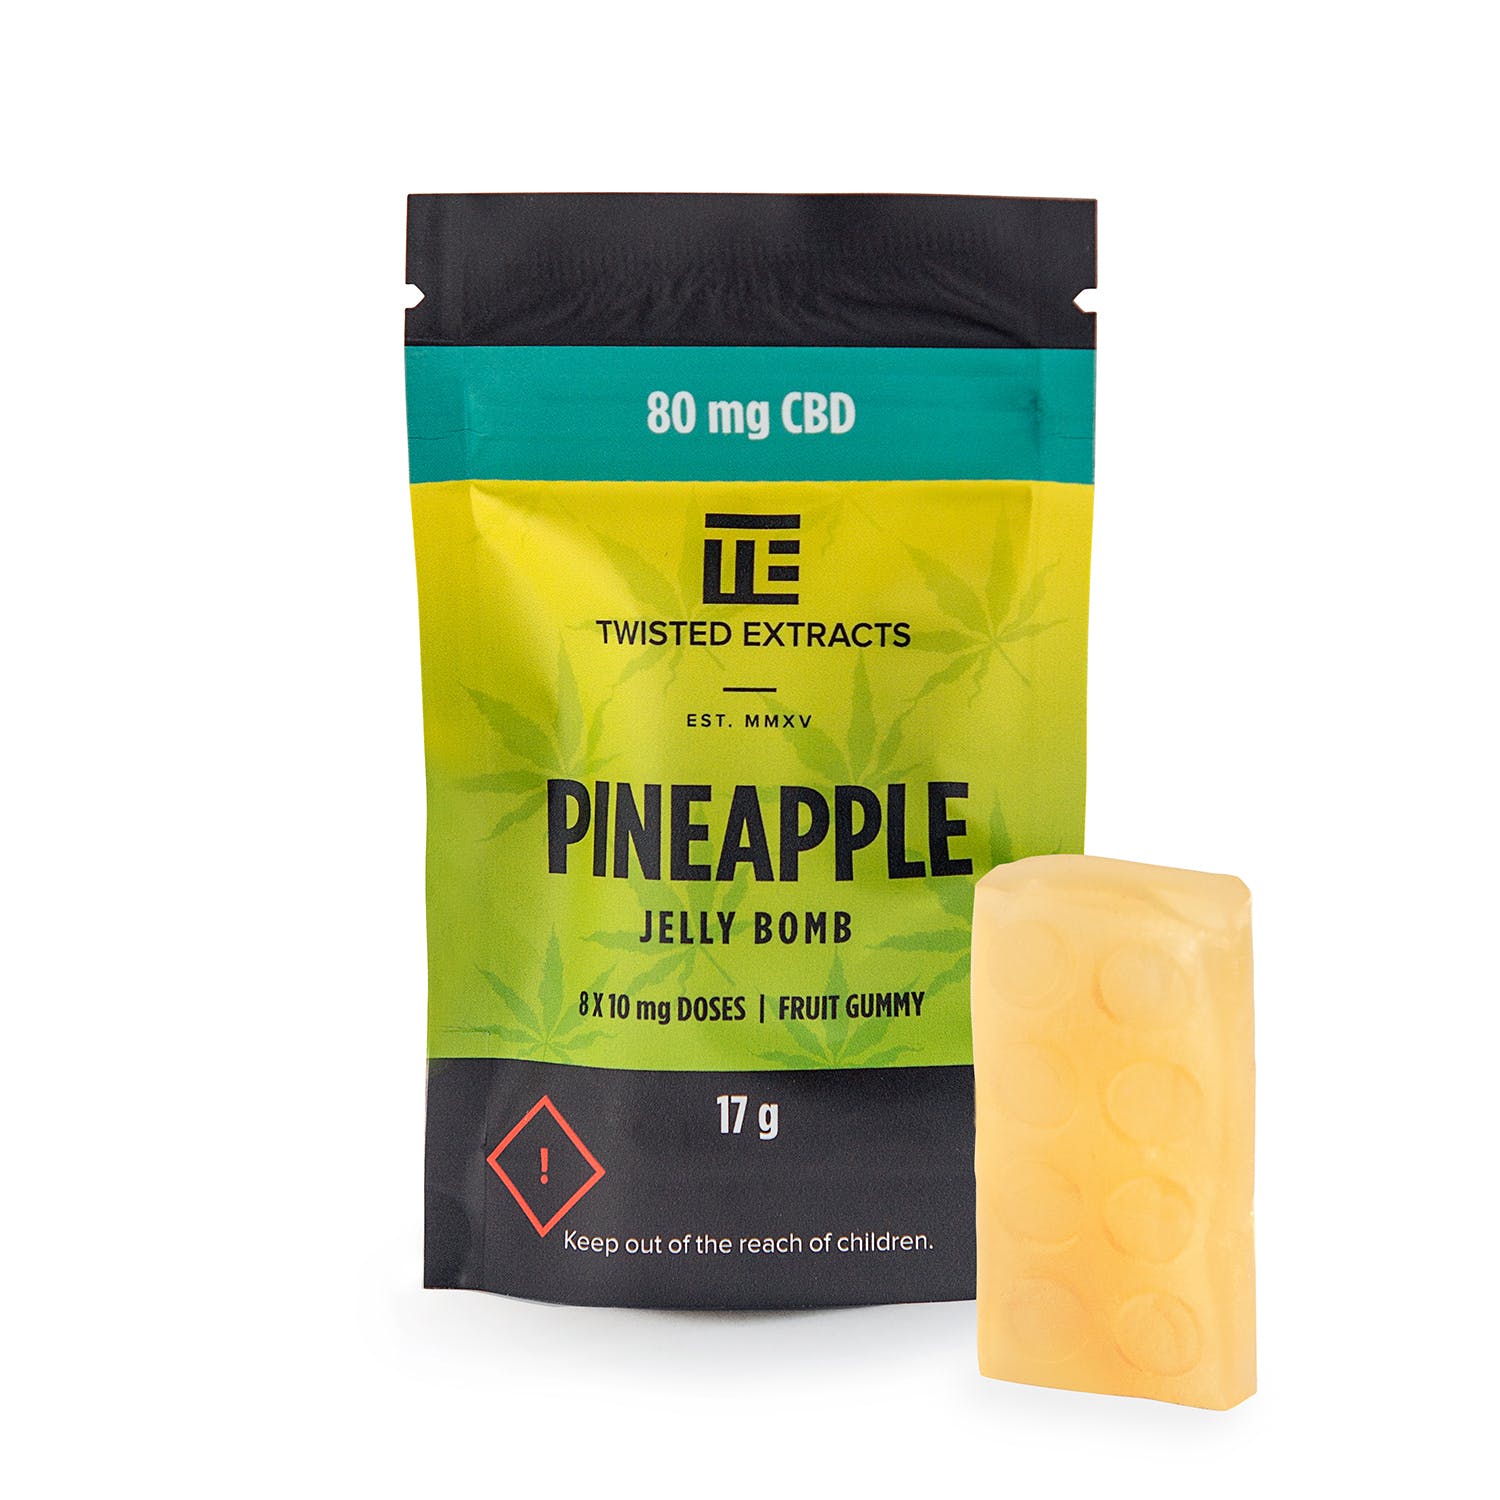 80mg CBD Pineapple Bombs by Twisted Extracts